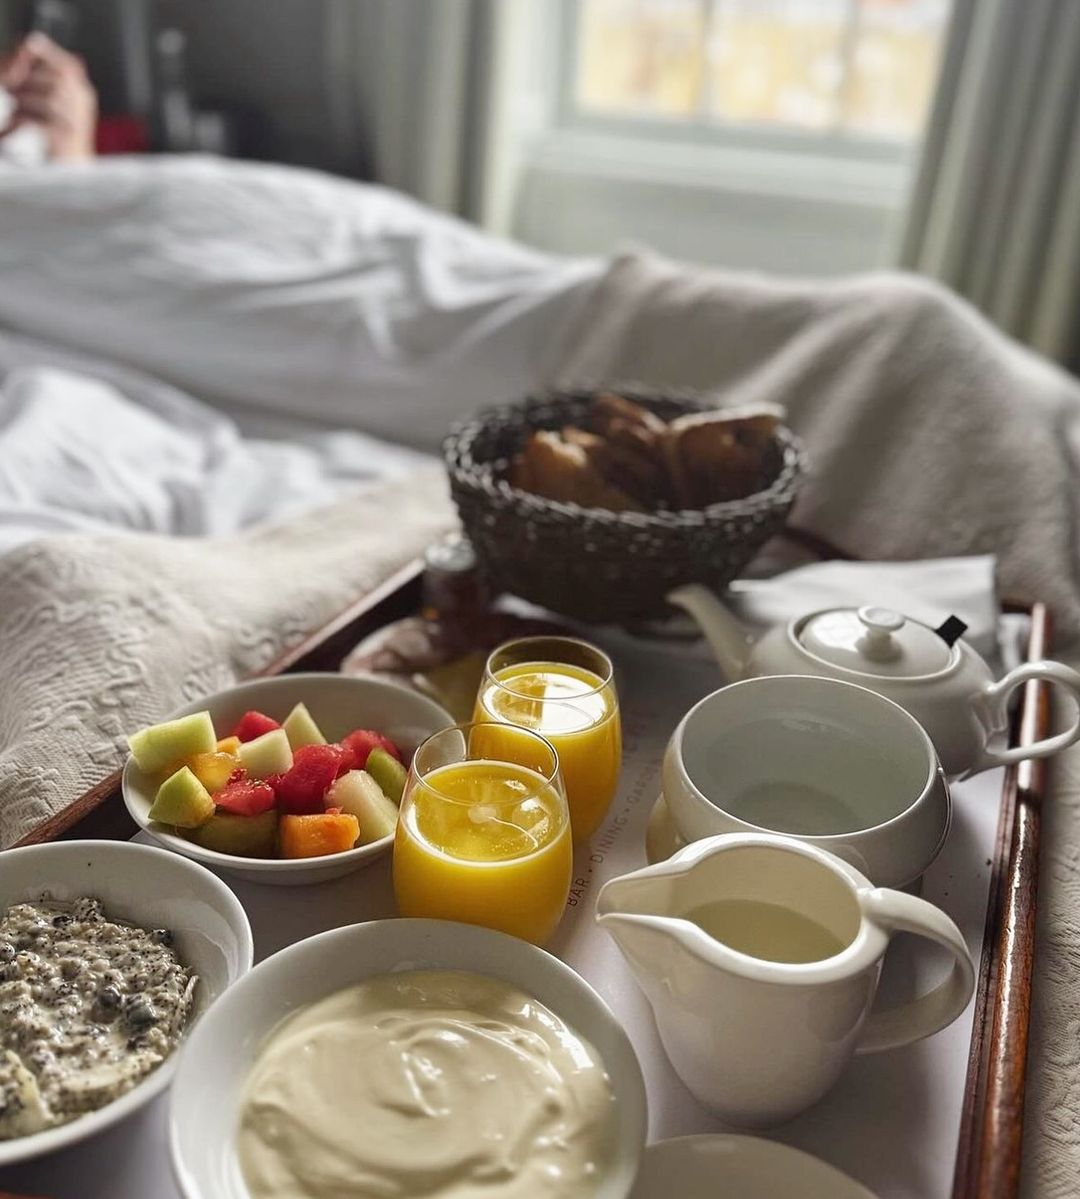 Breakfast in bed, you just can’t beat it. When you stay at The Royal Crescent Hotel, take your pick from our buffet selection or our ‘prepared to order’ menu and have it delivered to your door. The perfect way to start the day #bath #bathuk #LuxuryTravel